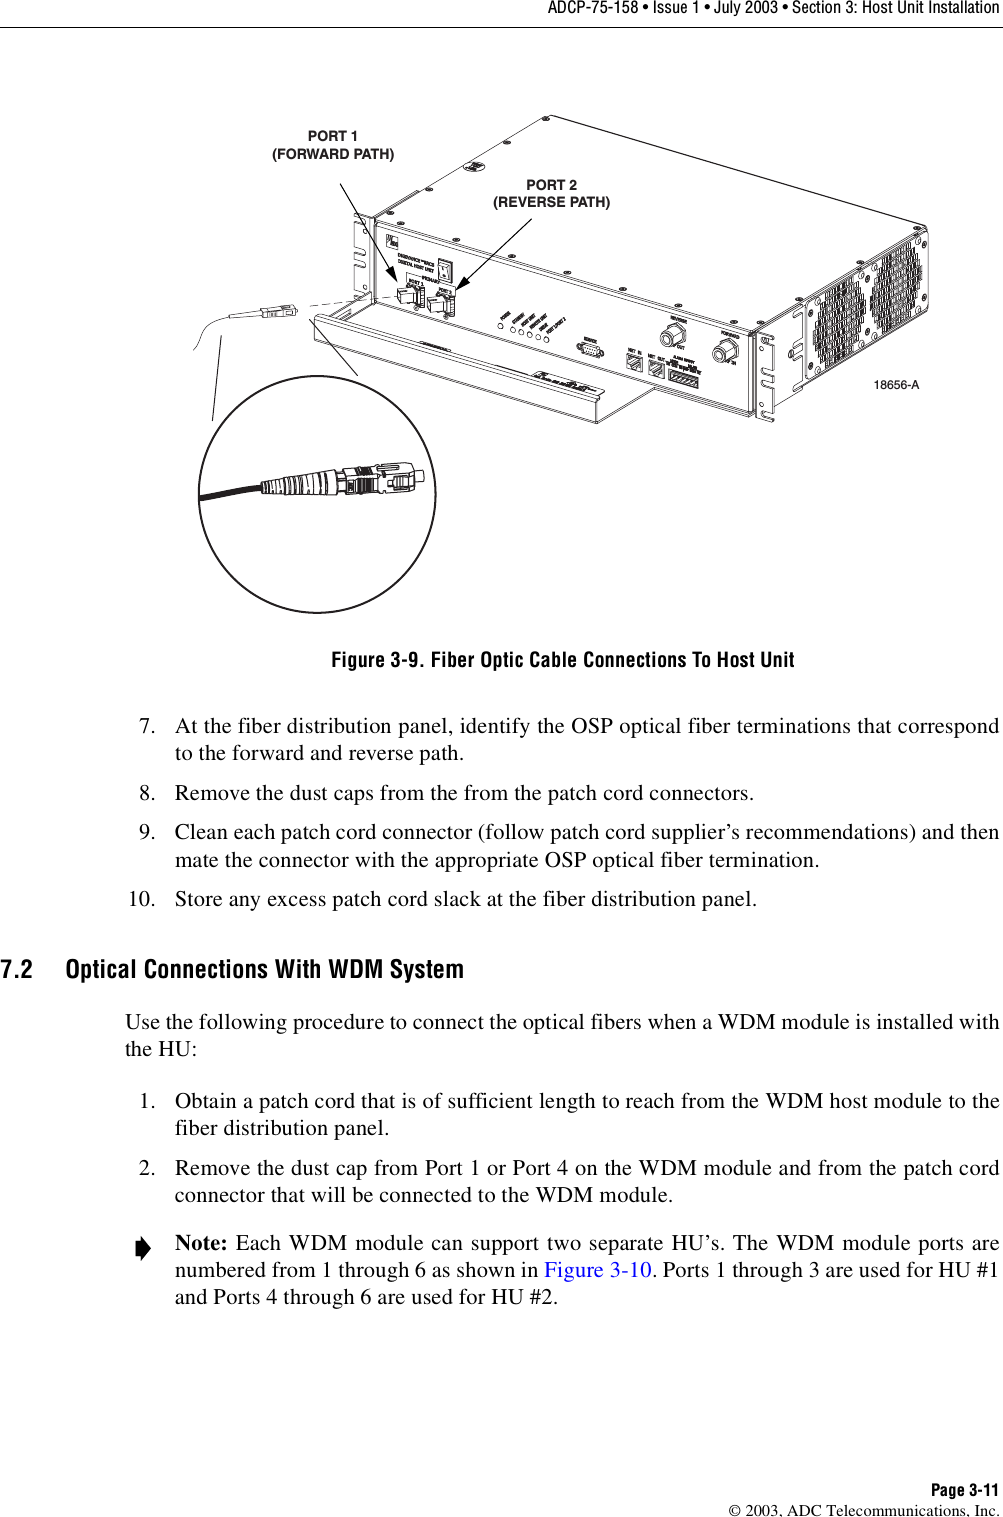 ADCP-75-158 • Issue 1 • July 2003 • Section 3: Host Unit InstallationPage 3-11© 2003, ADC Telecommunications, Inc.Figure 3-9. Fiber Optic Cable Connections To Host Unit7. At the fiber distribution panel, identify the OSP optical fiber terminations that correspondto the forward and reverse path. 8. Remove the dust caps from the from the patch cord connectors. 9. Clean each patch cord connector (follow patch cord supplier’s recommendations) and thenmate the connector with the appropriate OSP optical fiber termination. 10. Store any excess patch cord slack at the fiber distribution panel. 7.2 Optical Connections With WDM SystemUse the following procedure to connect the optical fibers when a WDM module is installed withthe HU: 1. Obtain a patch cord that is of sufficient length to reach from the WDM host module to thefiber distribution panel. 2. Remove the dust cap from Port 1 or Port 4 on the WDM module and from the patch cordconnector that will be connected to the WDM module. Note: Each WDM module can support two separate HU’s. The WDM module ports arenumbered from 1 through 6 as shown in Figure 3-10. Ports 1 through 3 are used for HU #1and Ports 4 through 6 are used for HU #2. 18656-APORT 1(FORWARD PATH)PORT 2(REVERSE PATH)